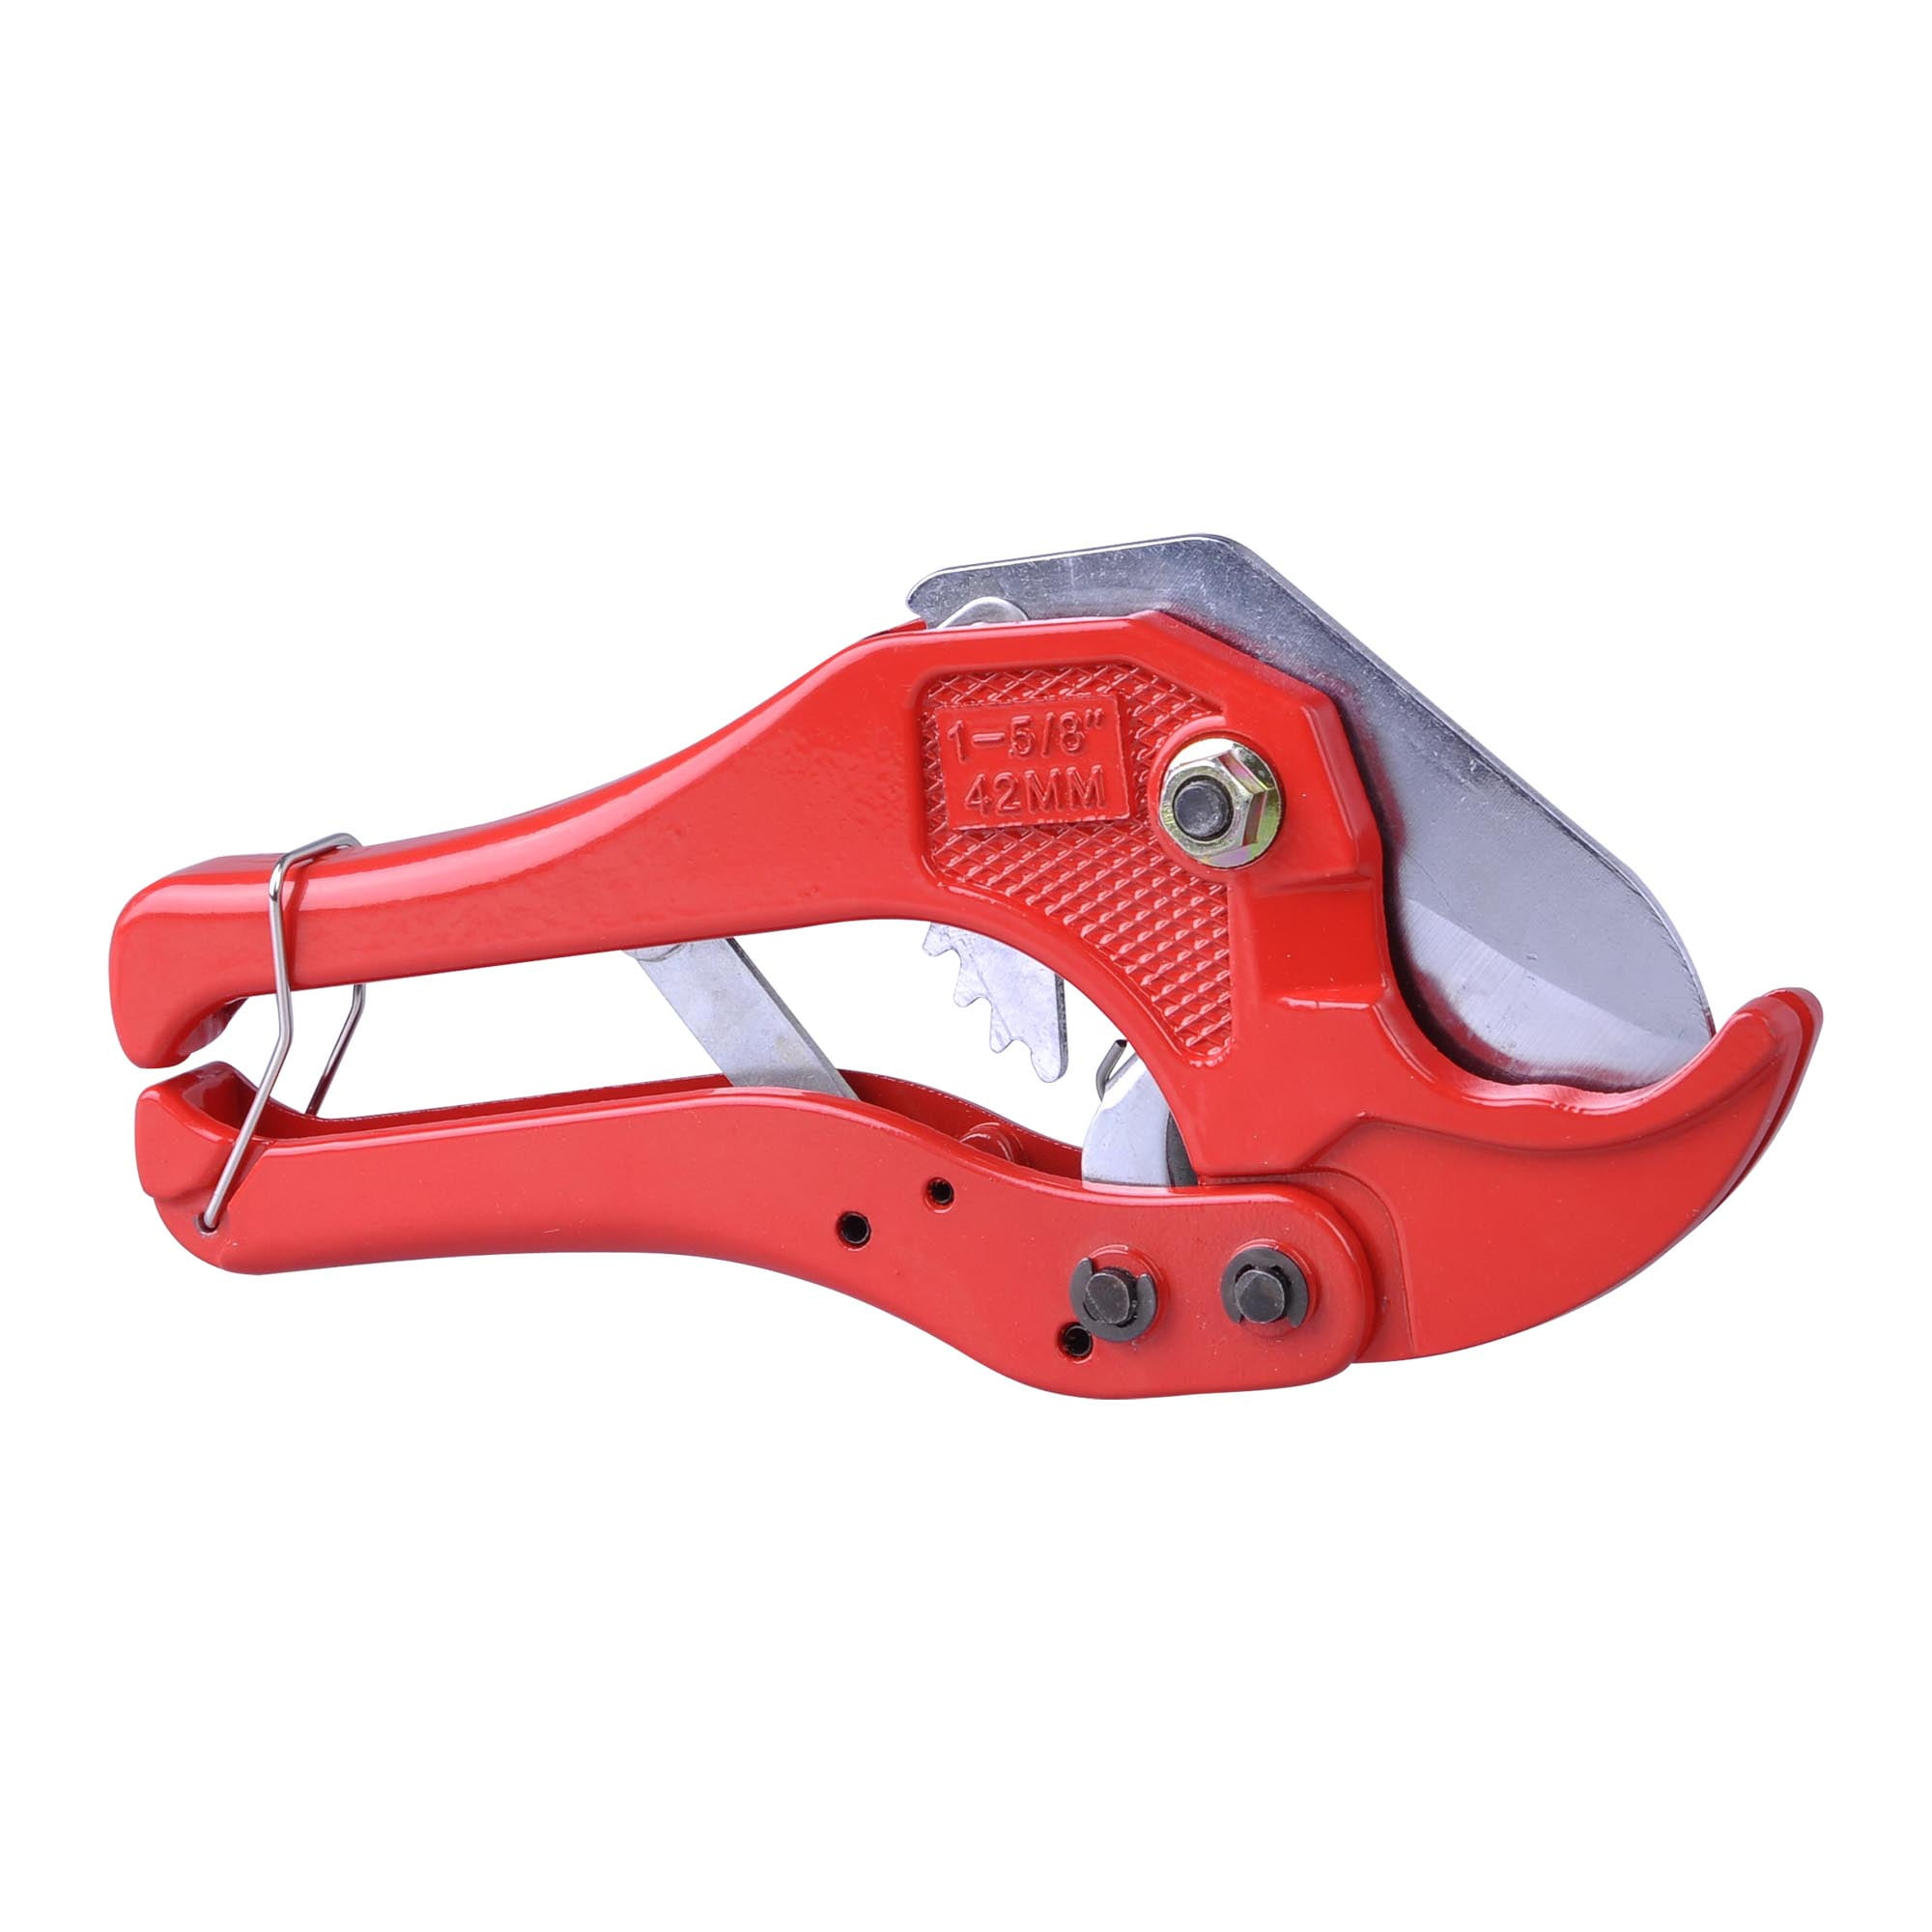 Tube and Pipe Cutter,Ratcheting Hose Cutter for Cutting PVC PEX CPVC PP 